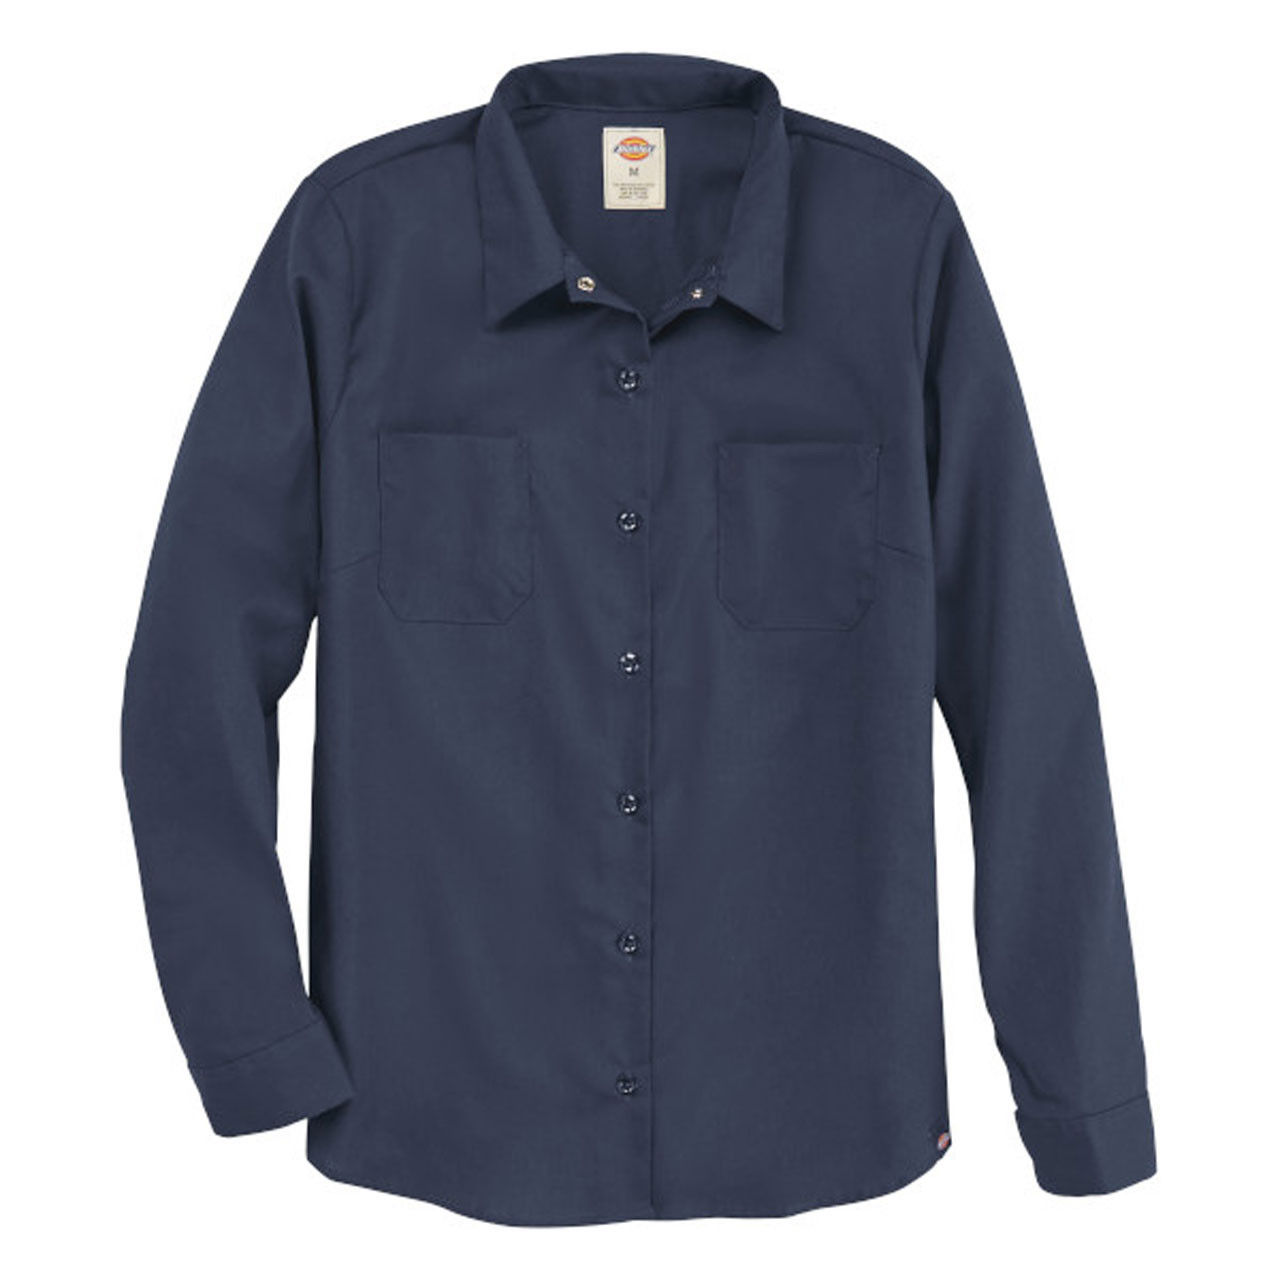 What brand makes these dickie long sleeve work shirts?